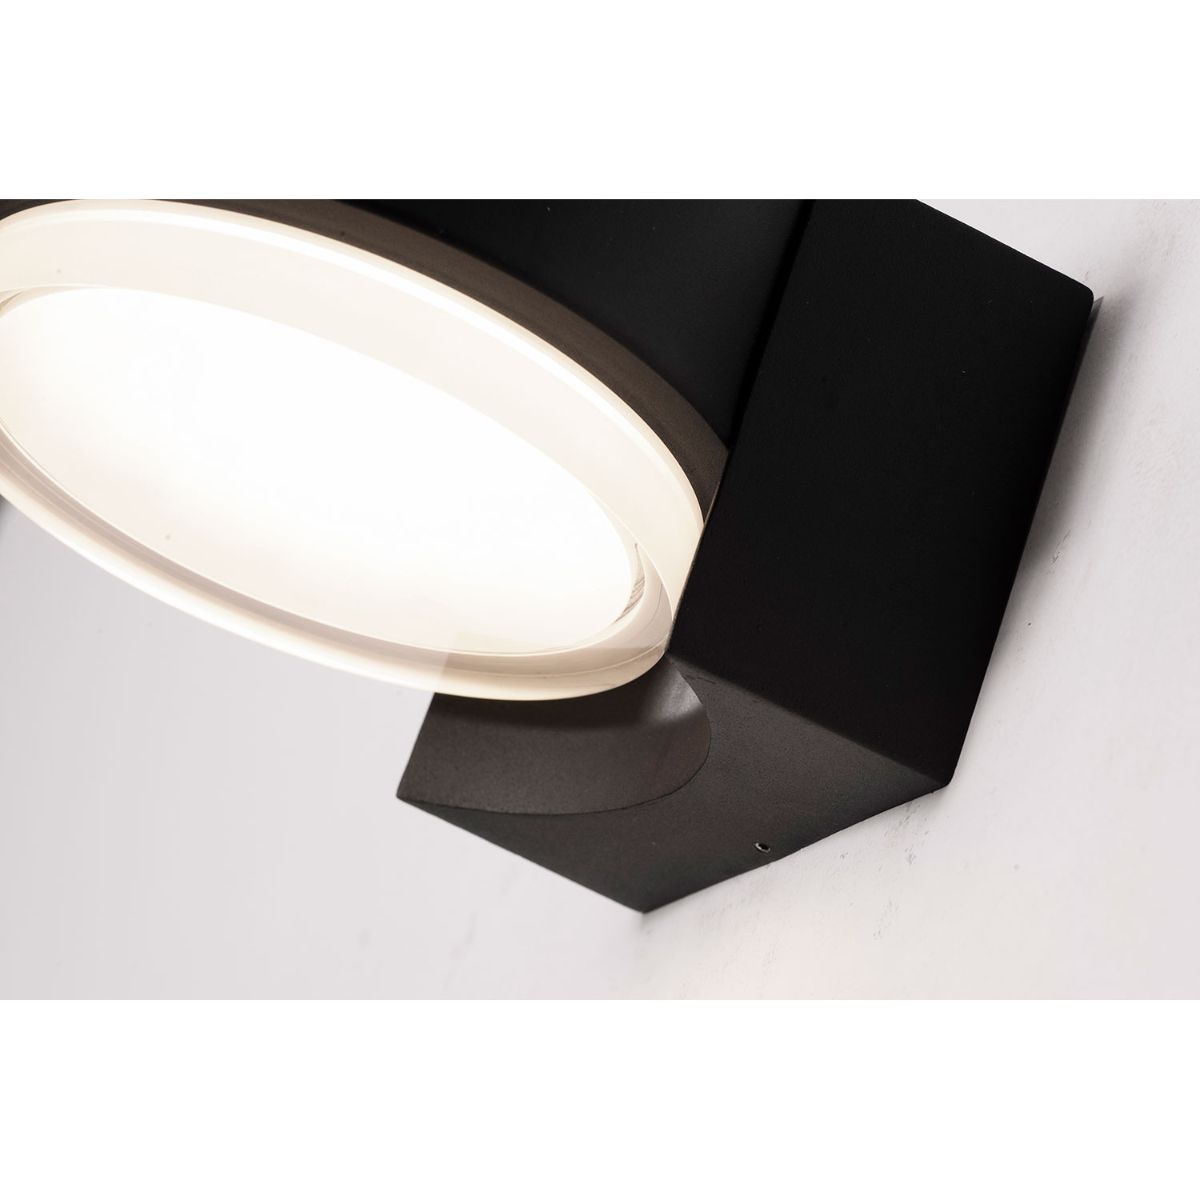 Elm 8 in. LED Outdoor Wall Sconce Selectable CCT Black Finish - Bees Lighting